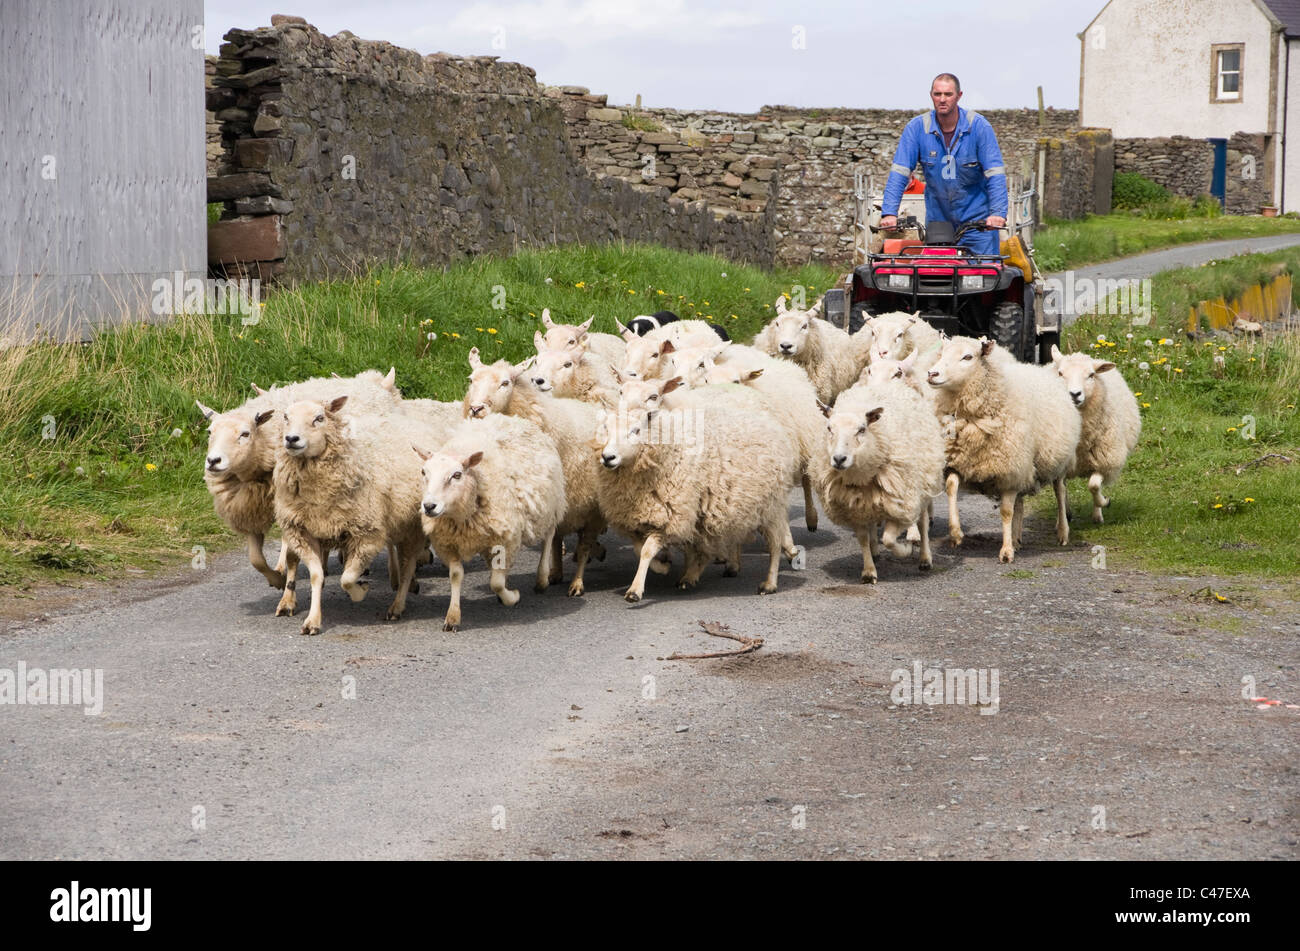 A farmer on quadbike and a sheepdog herding flock of sheep along a country road from a farm. Melby, Sandness, Shetland Islands, Scotland, UK, Britain Stock Photo